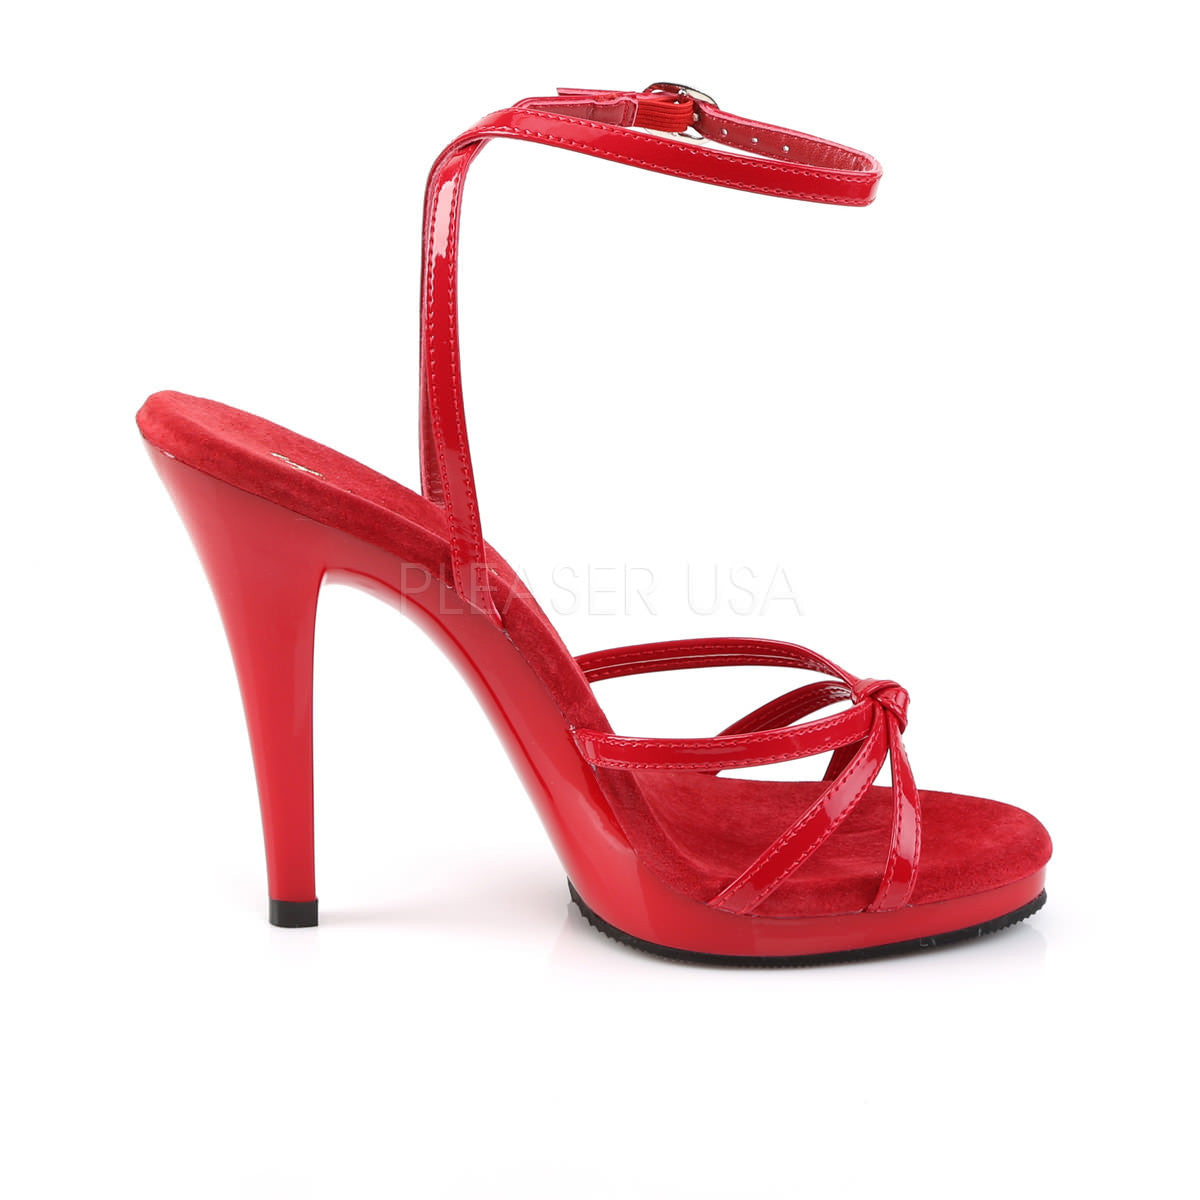 FABULICIOUS FLAIR-436 Red Pat-Red Stiletto Sandals